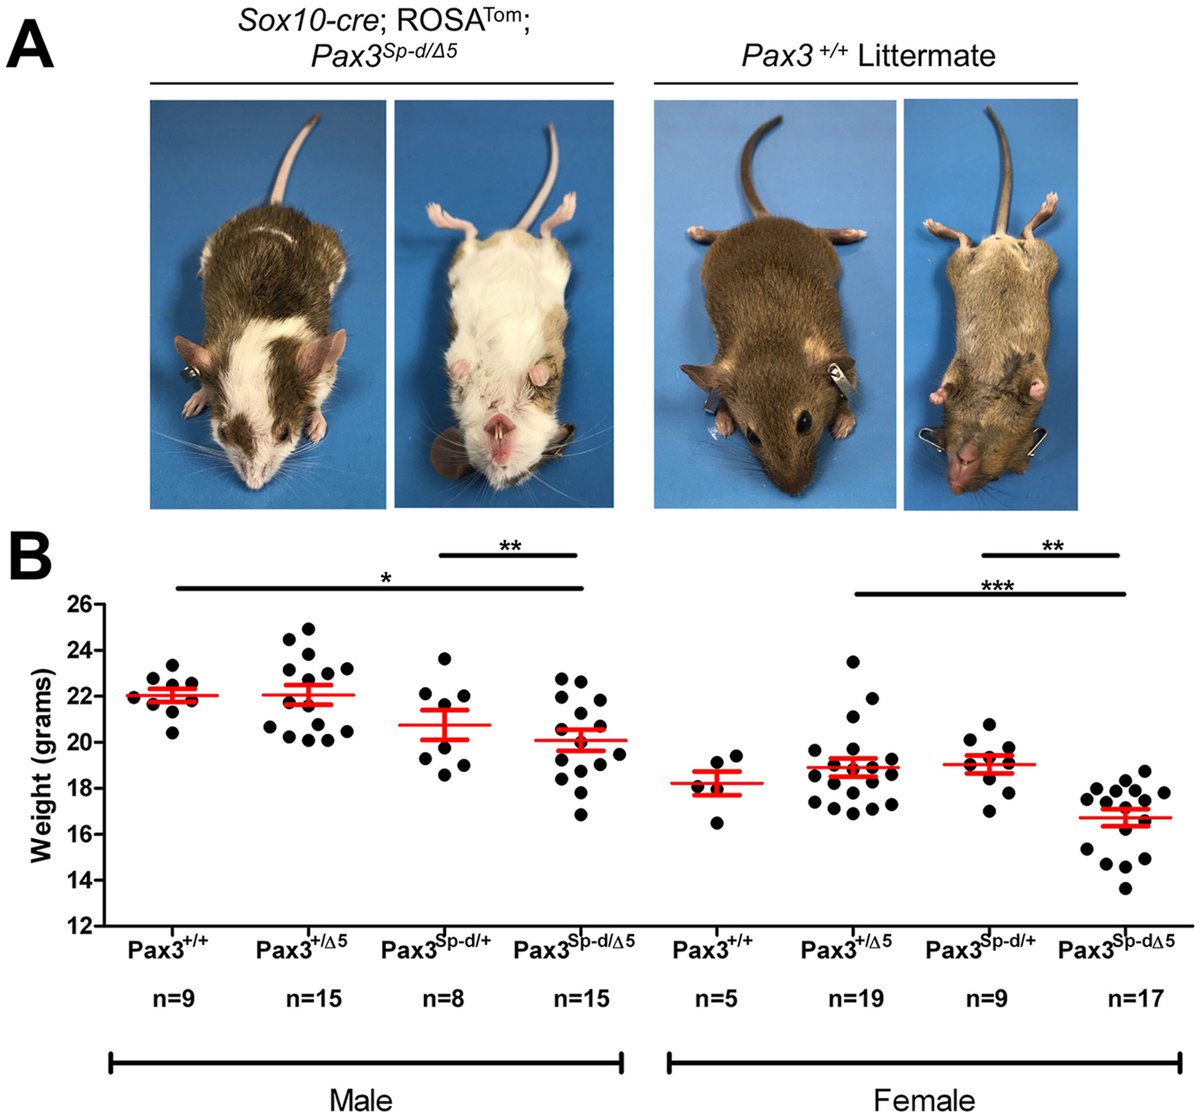 Because mouse models of  #SpinaBifida often die shortly after birth, it is difficult to study many of the lifelong complications that affect patients, like overactive bladder. By time- and lineage-restricting the causative Pax3 mutation, our mice survived up to 6 weeks of age. 6/